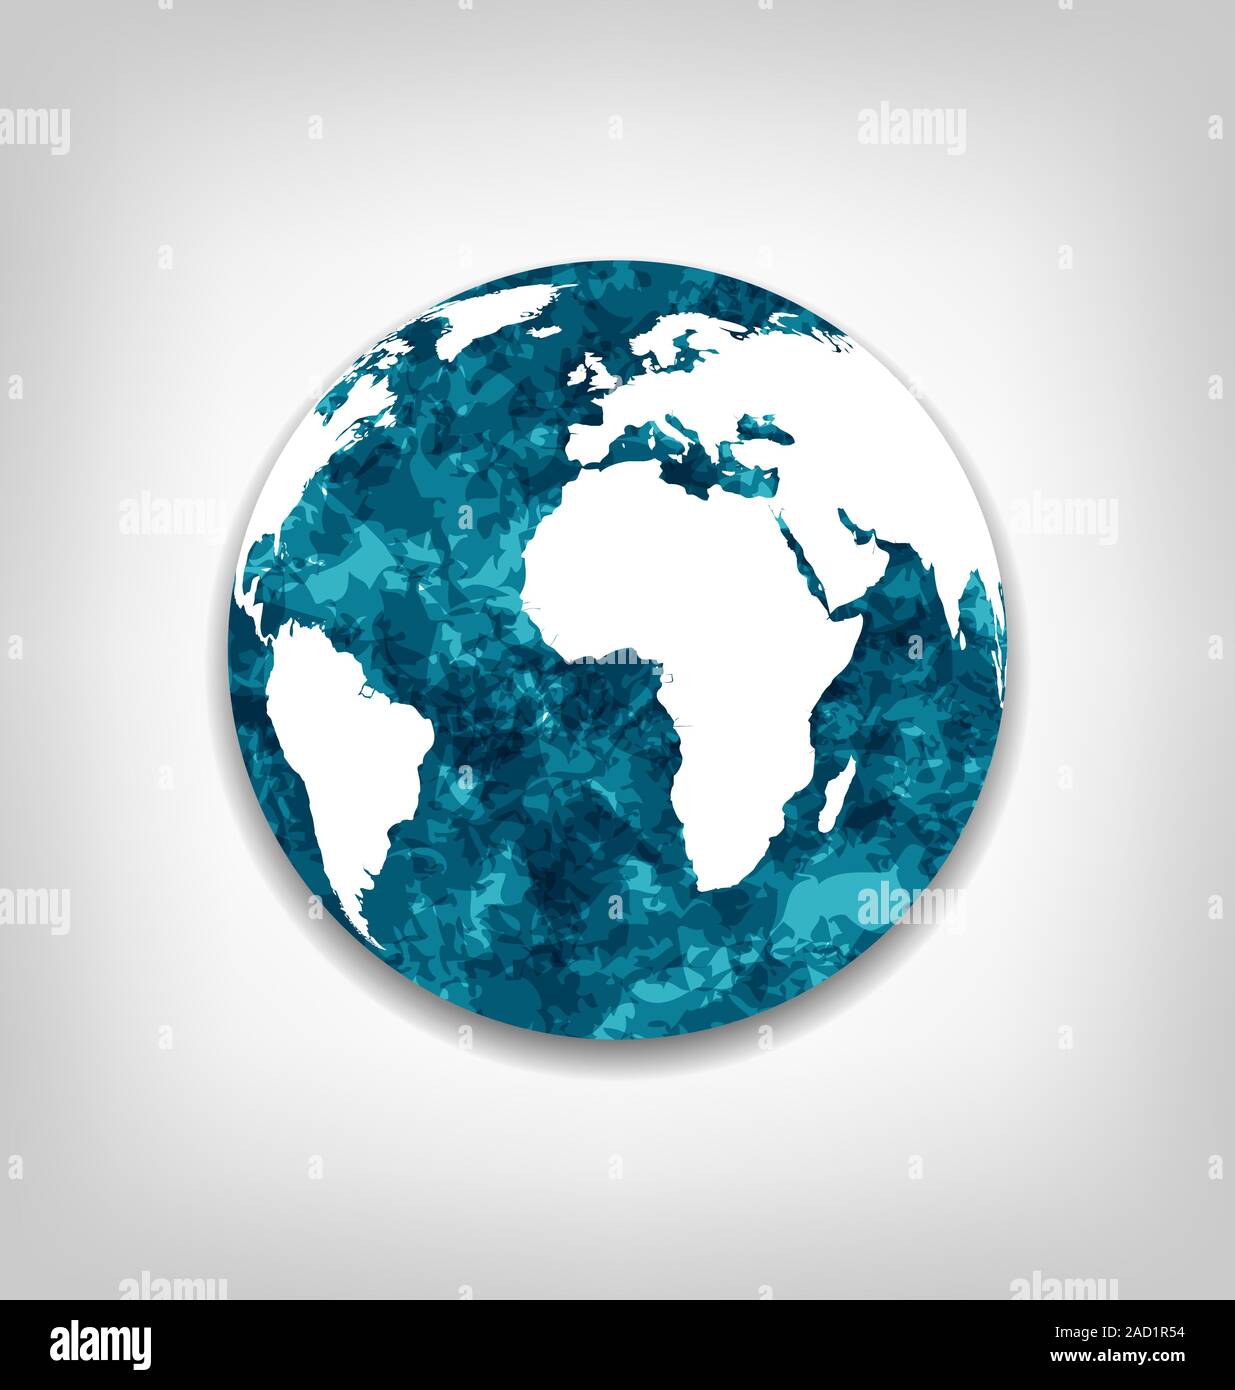 Save the Earth from global warming Stock Photo